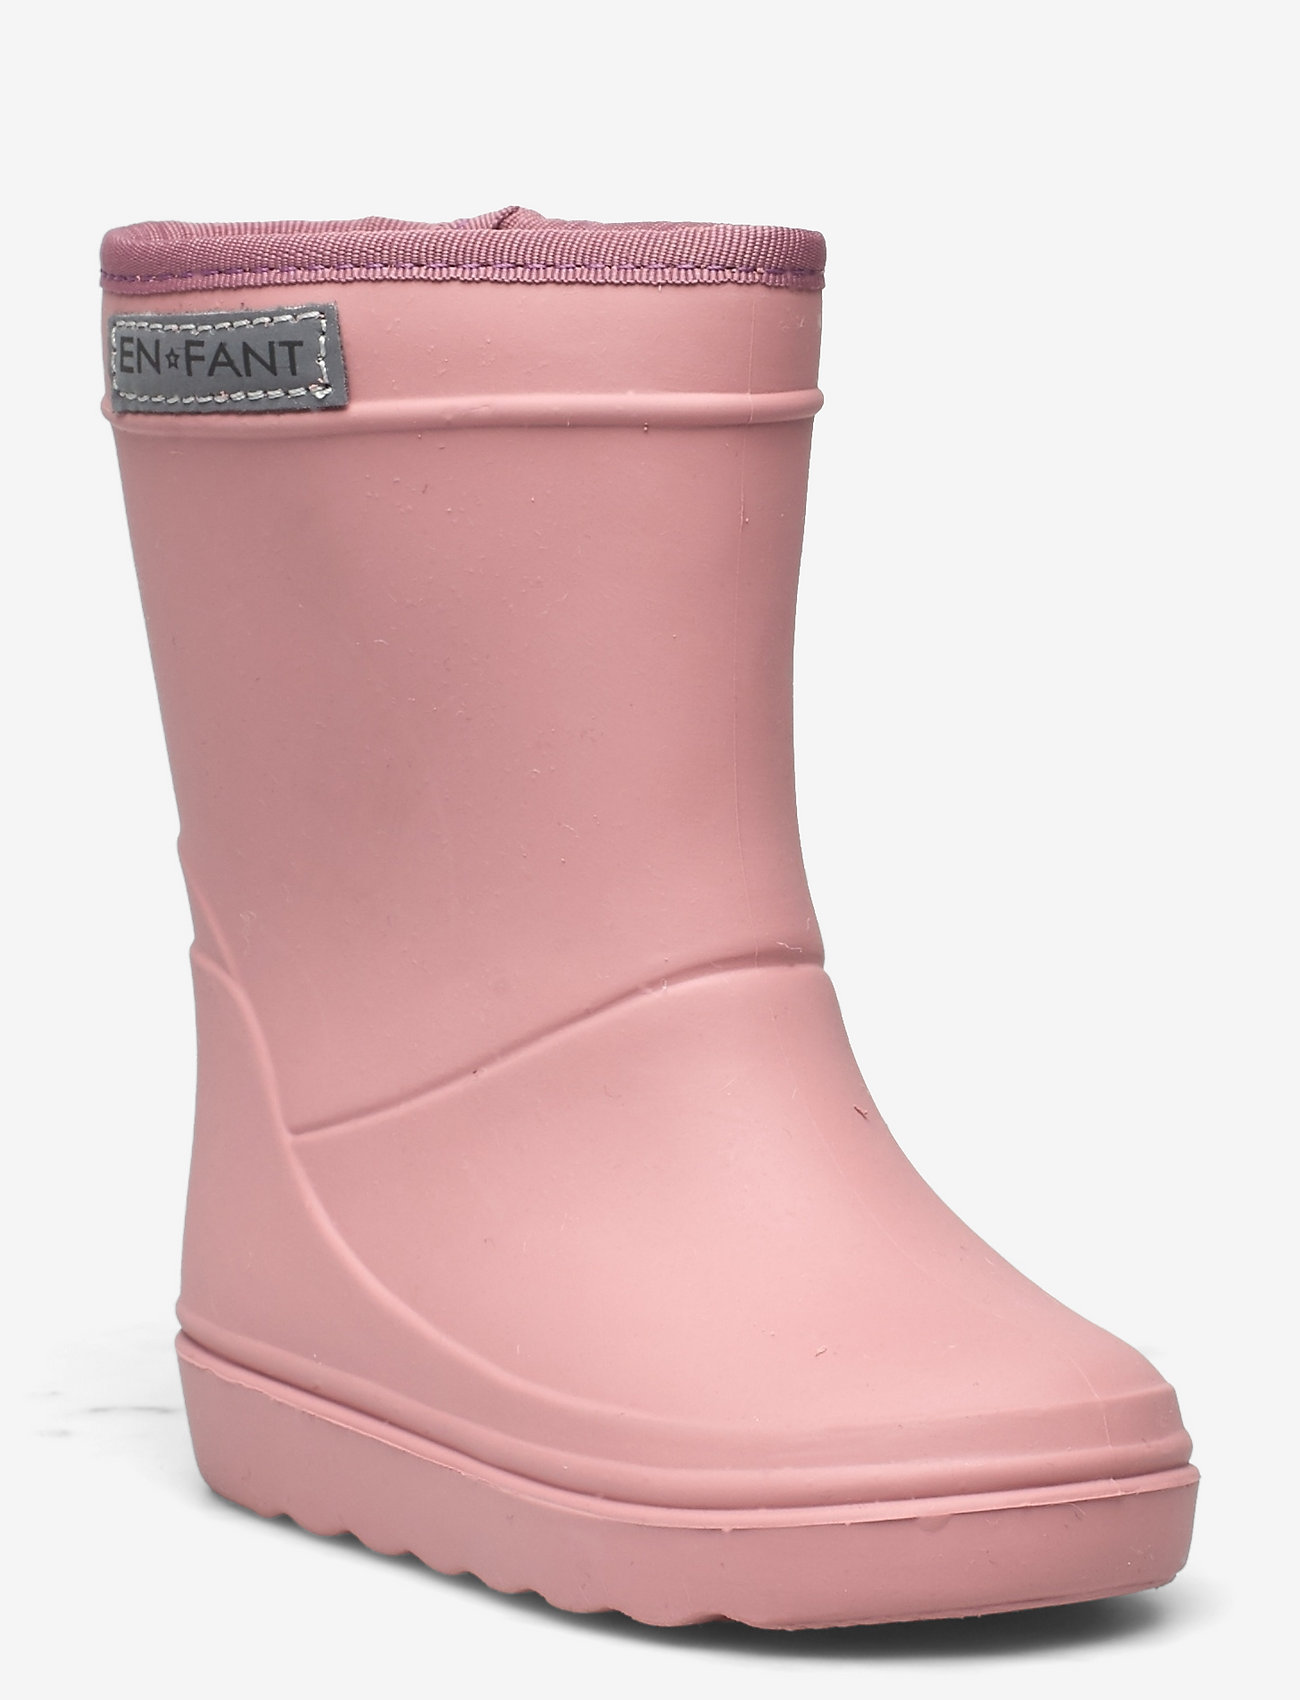 En Fant - Thermo Boots - talvikumisaappaat - old rose - 0